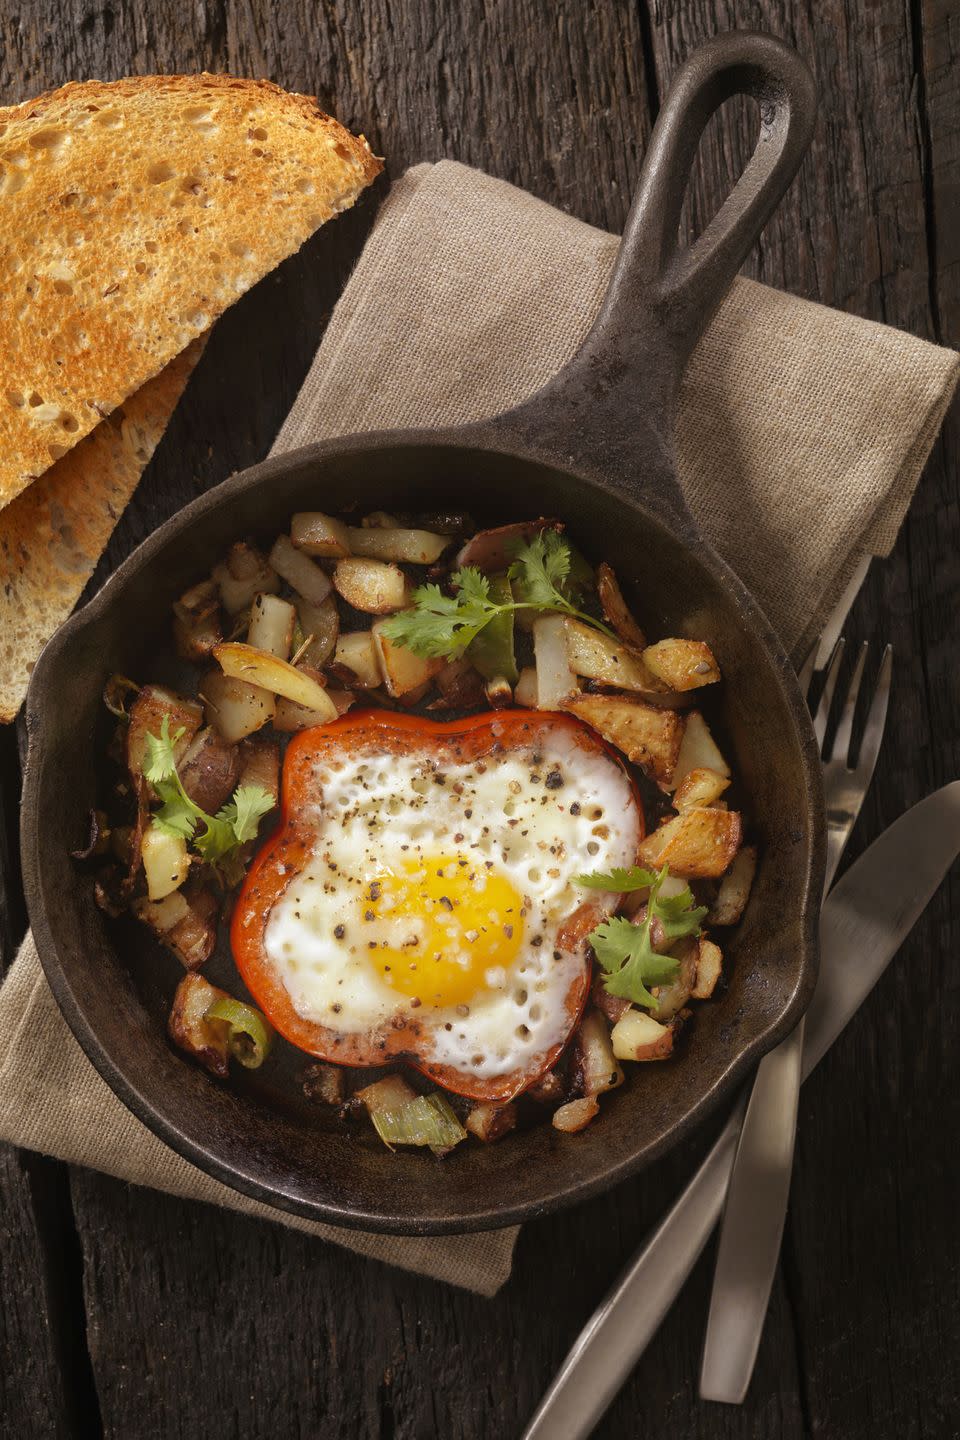 <p>Potatoes, red pepper, beans, and bacon (yep, bacon!) all go into this rustic meal. And you still get a package of <a href="https://fave.co/2KGnmsL" rel="nofollow noopener" target="_blank" data-ylk="slk:Dole Banana Dippers" class="link ">Dole Banana Dippers</a> for dessert.</p><p><a href="https://www.goodhousekeeping.com/food-recipes/a5774/sunday-night-vegetable-hash-2332/" rel="nofollow noopener" target="_blank" data-ylk="slk:Get the recipe for Sunday Night Vegetable Hash »" class="link "><em>Get the recipe for Sunday Night Vegetable Hash »</em></a></p>